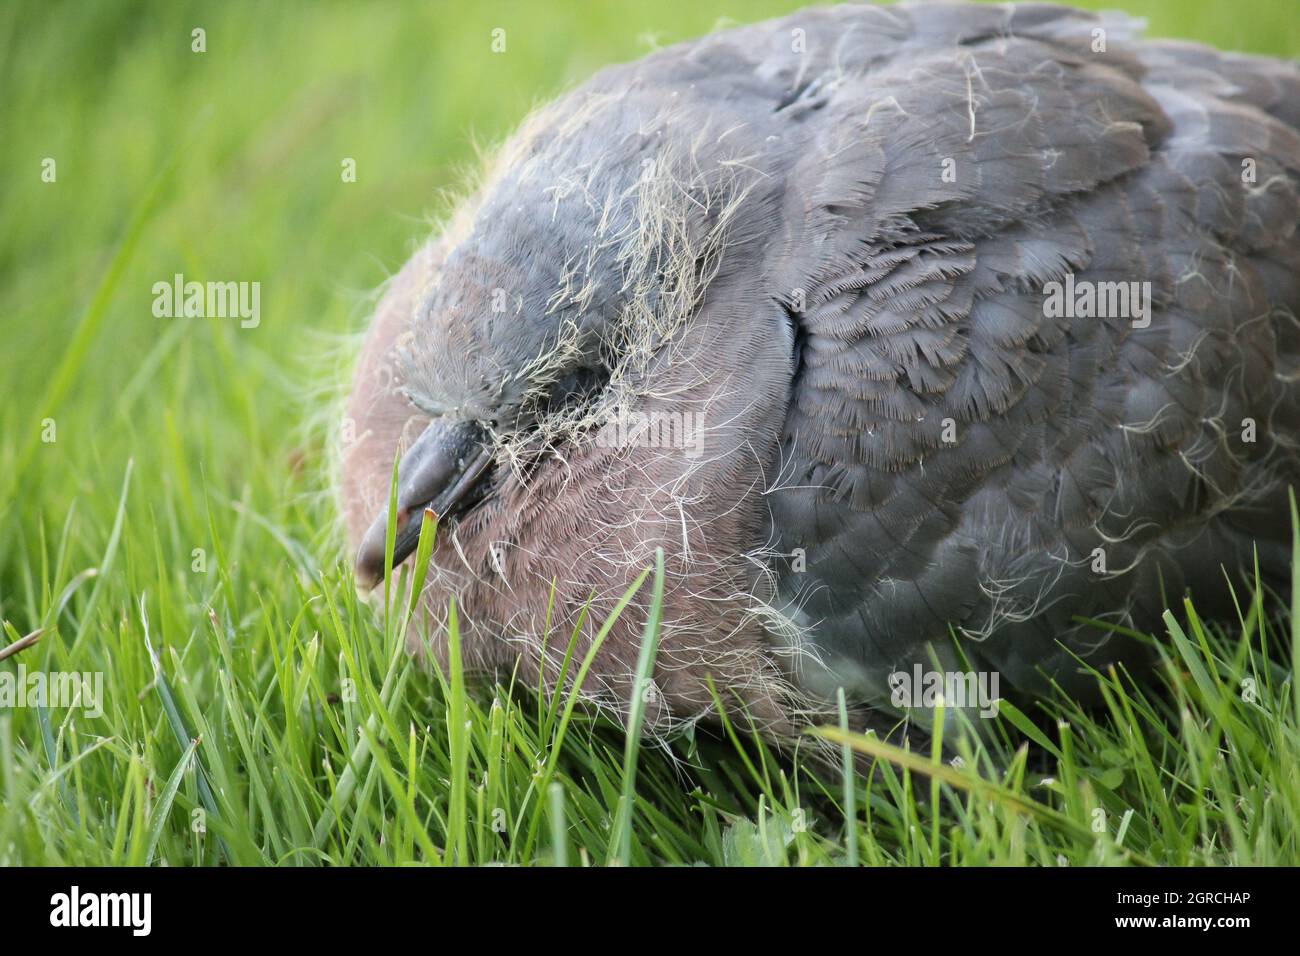 wood pigeon baby bird fledgling nestling with feathers and remaining yellow fluff Stock Photo